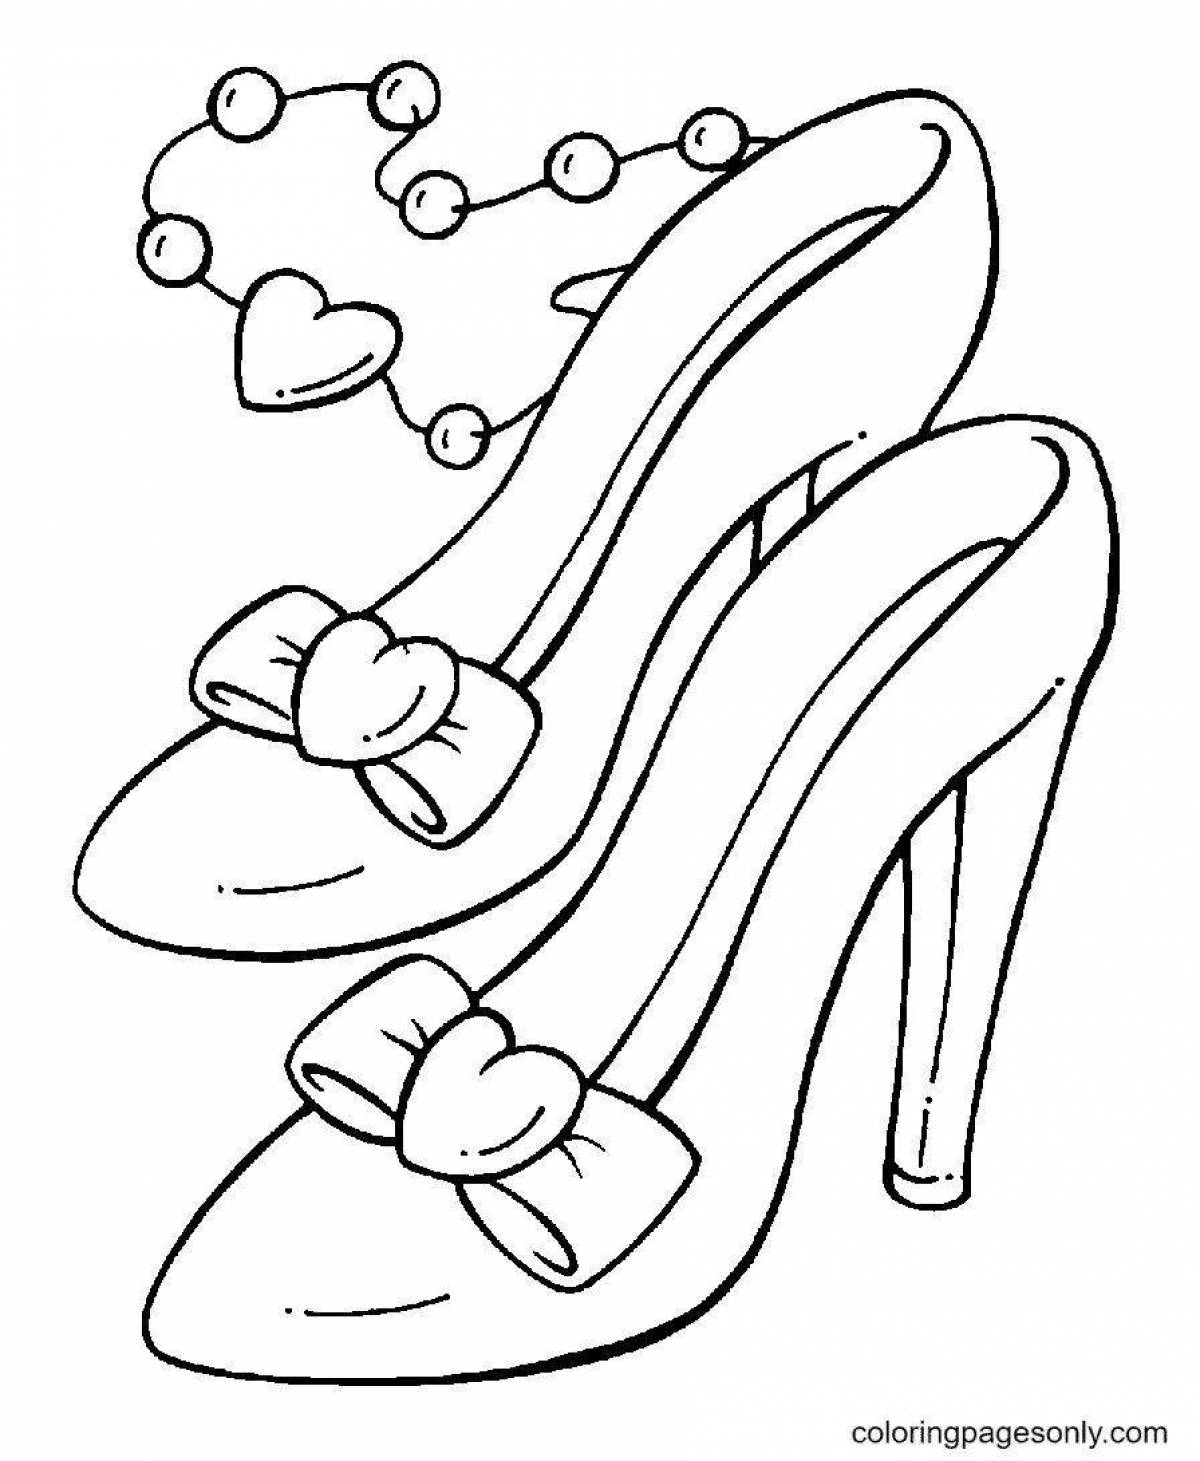 Fashion shoes coloring page